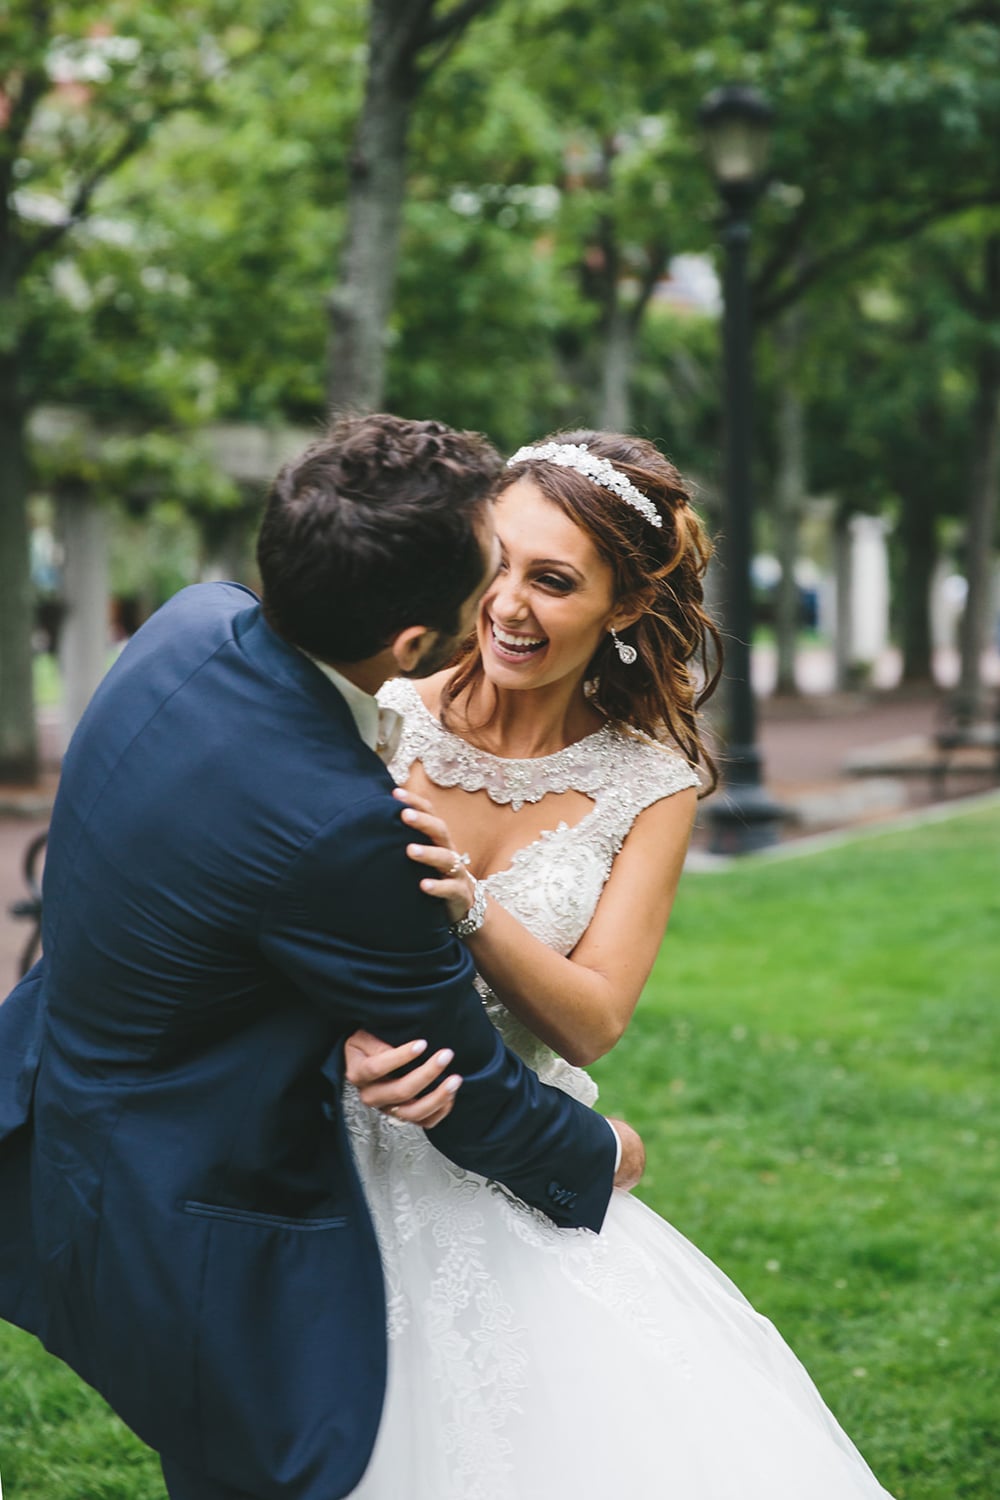 This documentary photograph of a bride and groom laughing together is one of the best wedding photographs of 2016